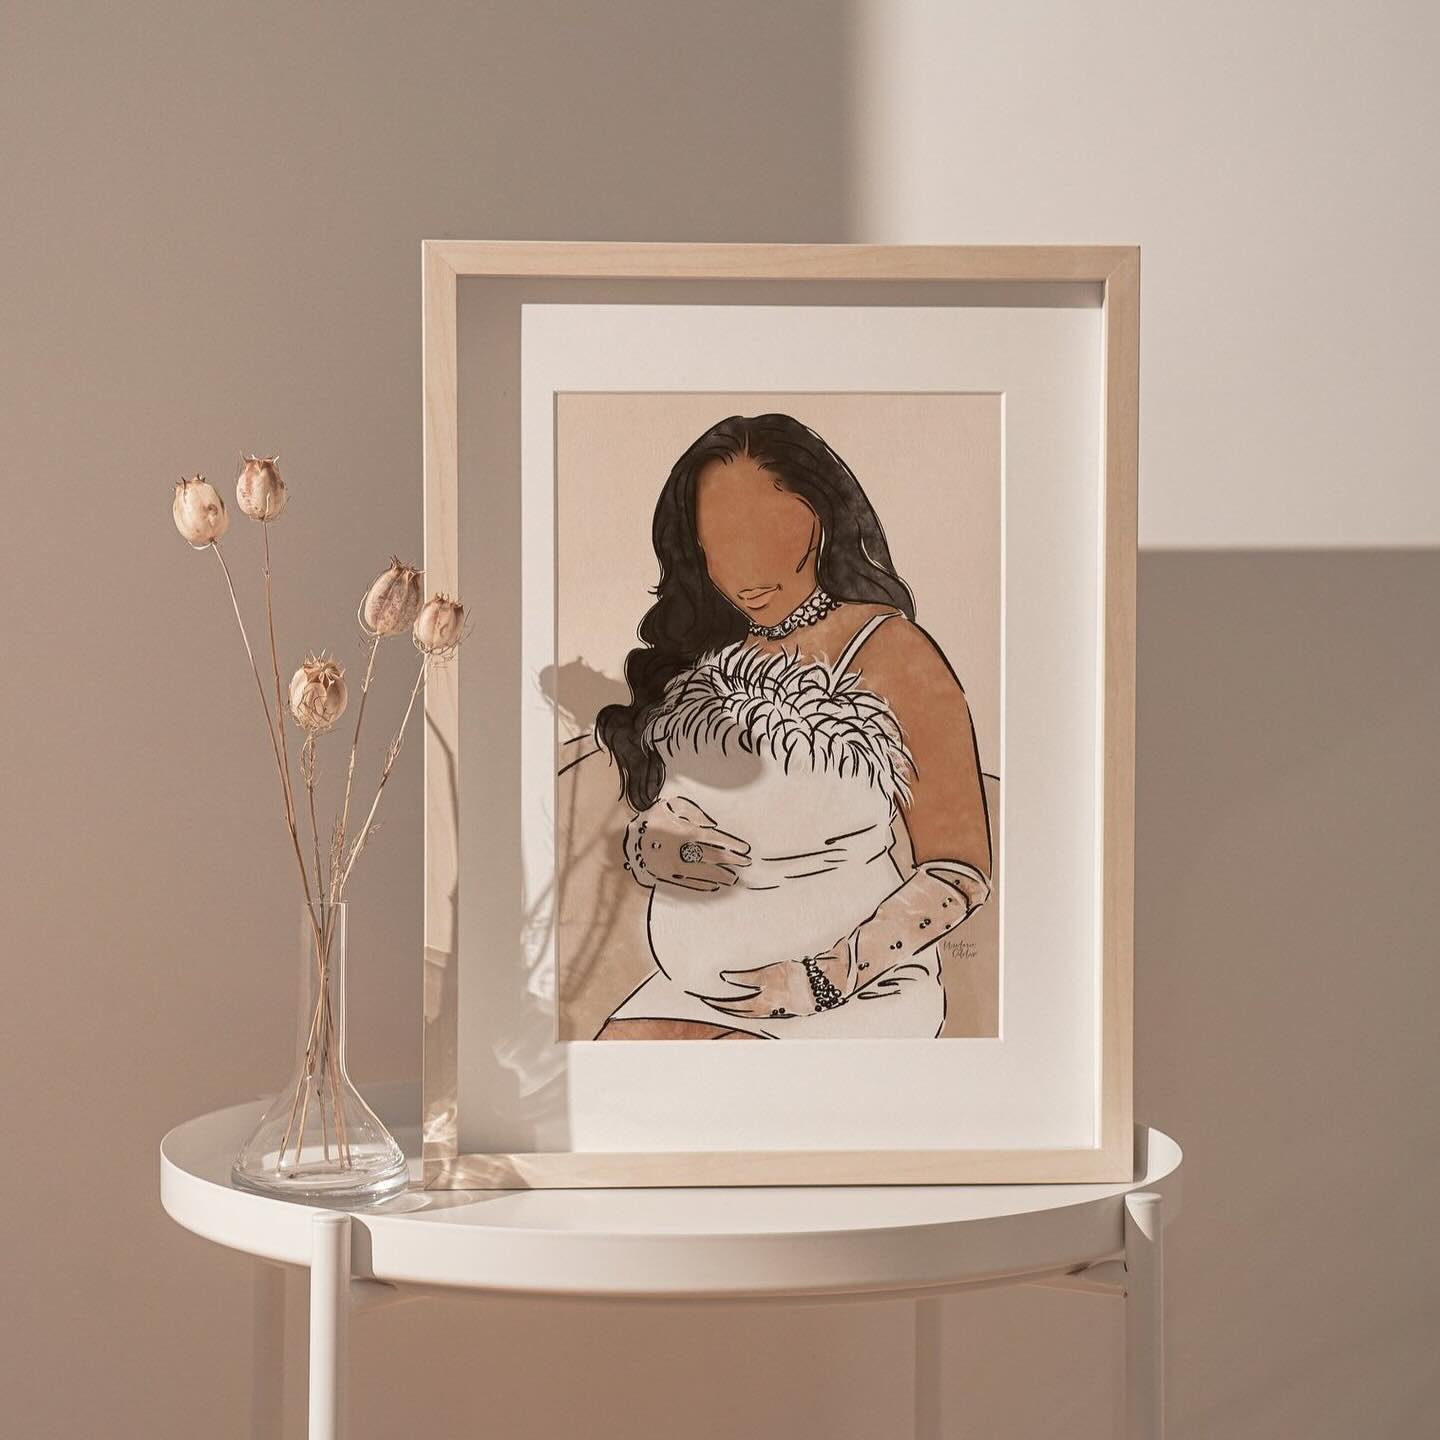 This Mother&rsquo;s Day, gift the woman who means the world to you with a personal, timeless portrait. I'm crafting just five exclusive slots, available until April 30th, to express love through art. Secure one now and create an unforgettable, heartf